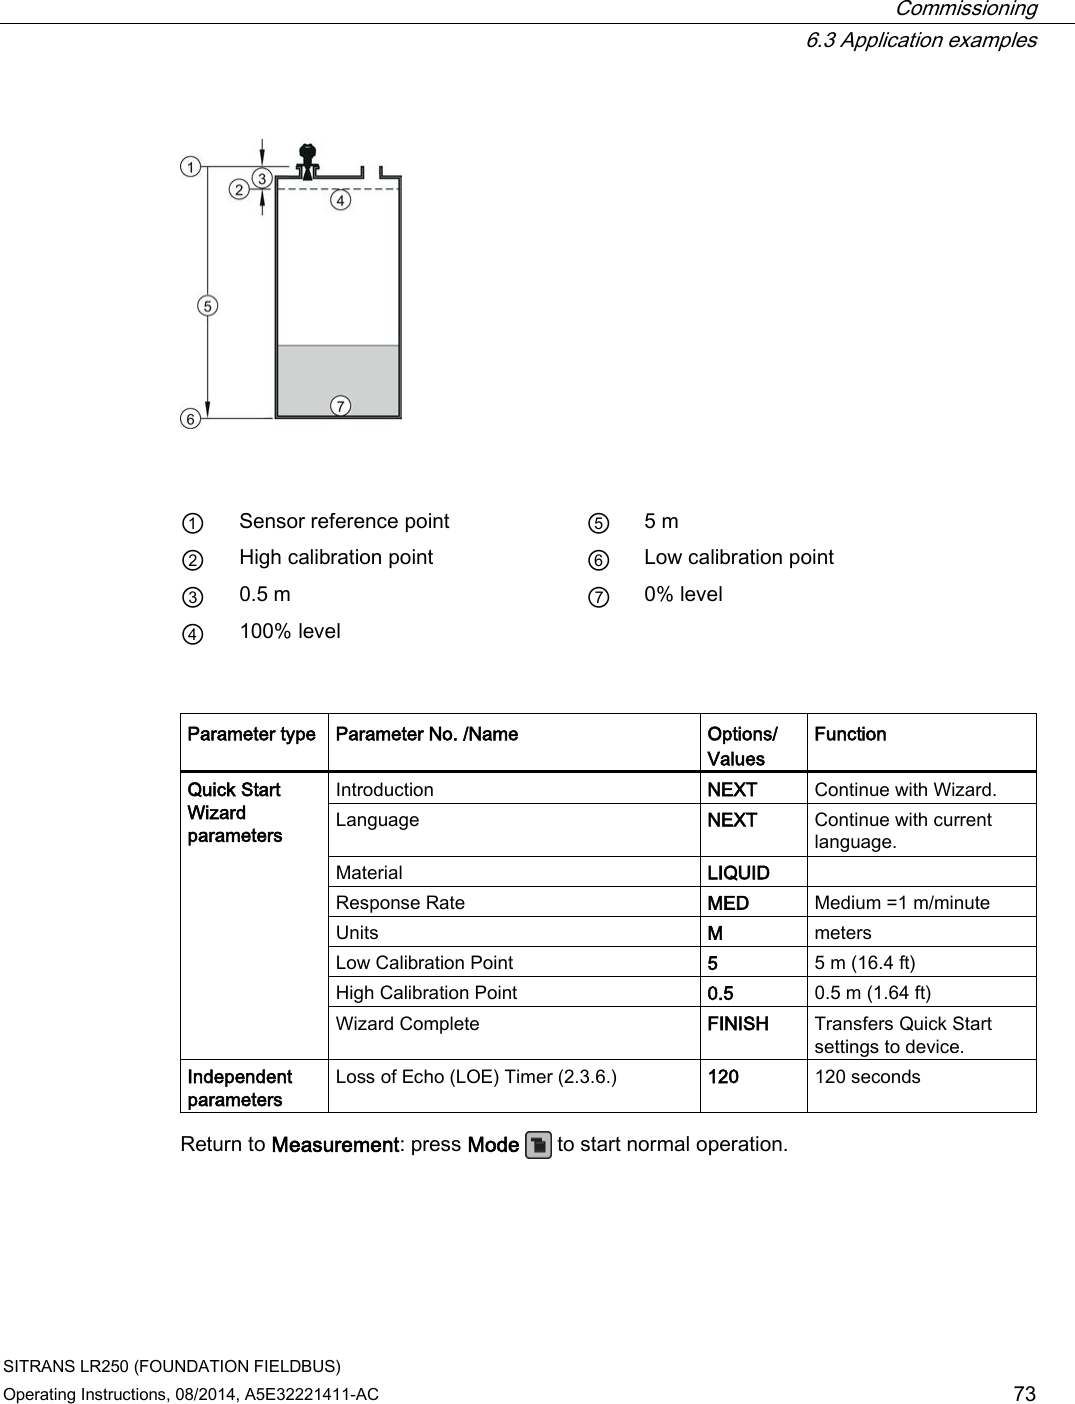  Commissioning  6.3 Application examples SITRANS LR250 (FOUNDATION FIELDBUS) Operating Instructions, 08/2014, A5E32221411-AC 73       ① Sensor reference point ⑤ 5 m ② High calibration point ⑥ Low calibration point ③ 0.5 m ⑦ 0% level ④ 100% level       Parameter type Parameter No. /Name Options/ Values Function Quick Start Wizard parameters Introduction NEXT Continue with Wizard. Language NEXT Continue with current language. Material LIQUID   Response Rate MED Medium =1 m/minute Units  M meters Low Calibration Point 5 5 m (16.4 ft) High Calibration Point 0.5 0.5 m (1.64 ft) Wizard Complete FINISH Transfers Quick Start settings to device. Independent parameters Loss of Echo (LOE) Timer (2.3.6.) 120 120 seconds Return to Measurement: press Mode   to start normal operation.  